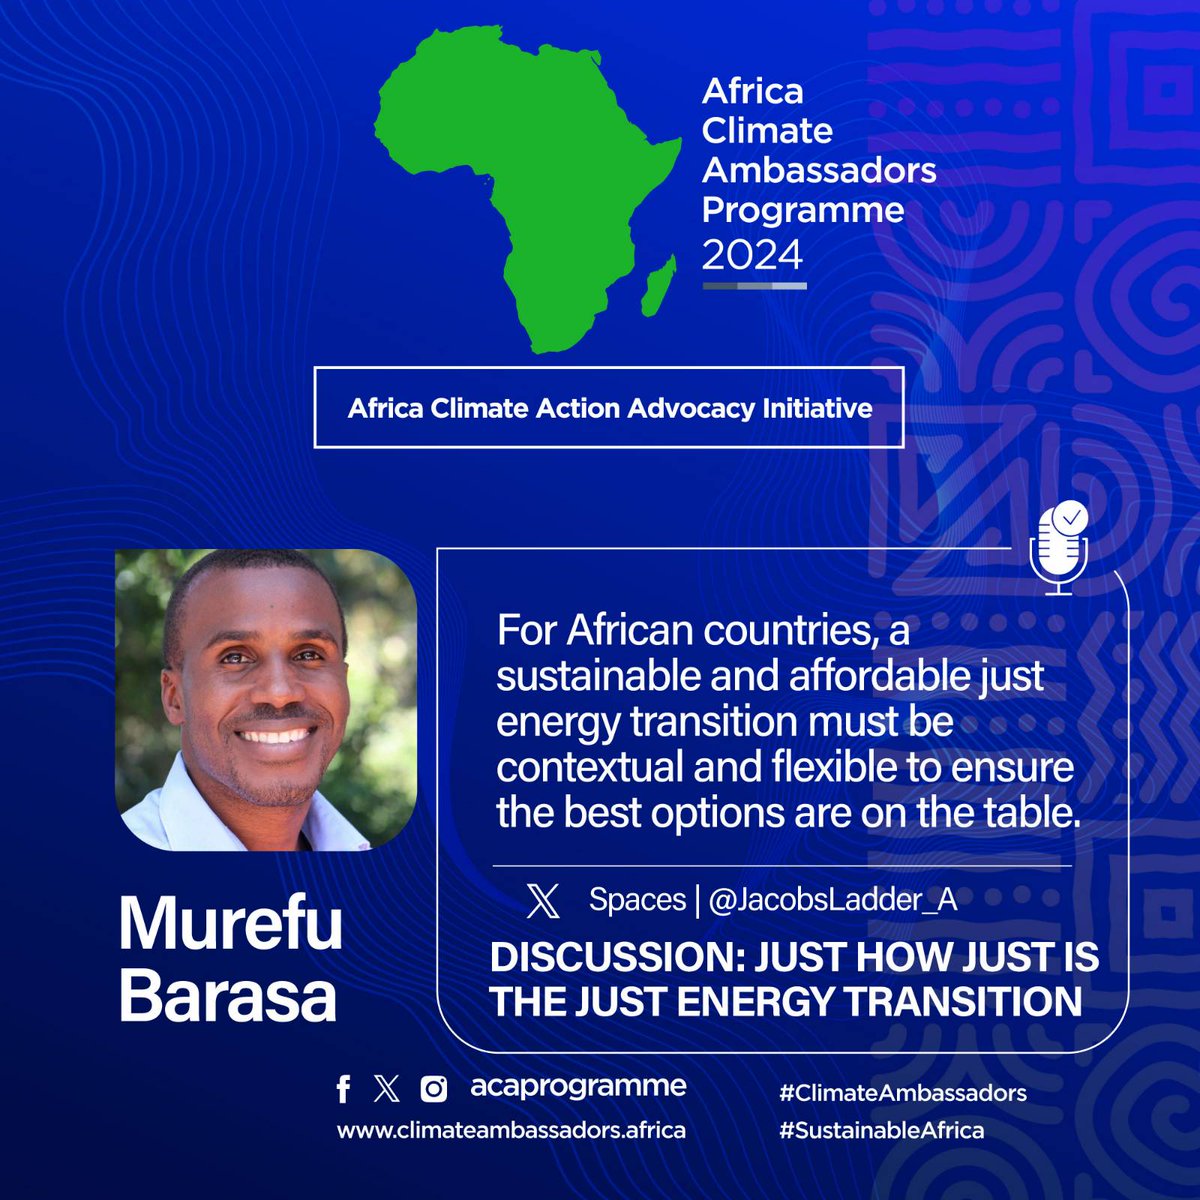 X-Space Conversations on Just How Just Is the Just Energy Transition - @MurefuBarasa Click here if you missed out: twitter.com/JacobsLadder_A…